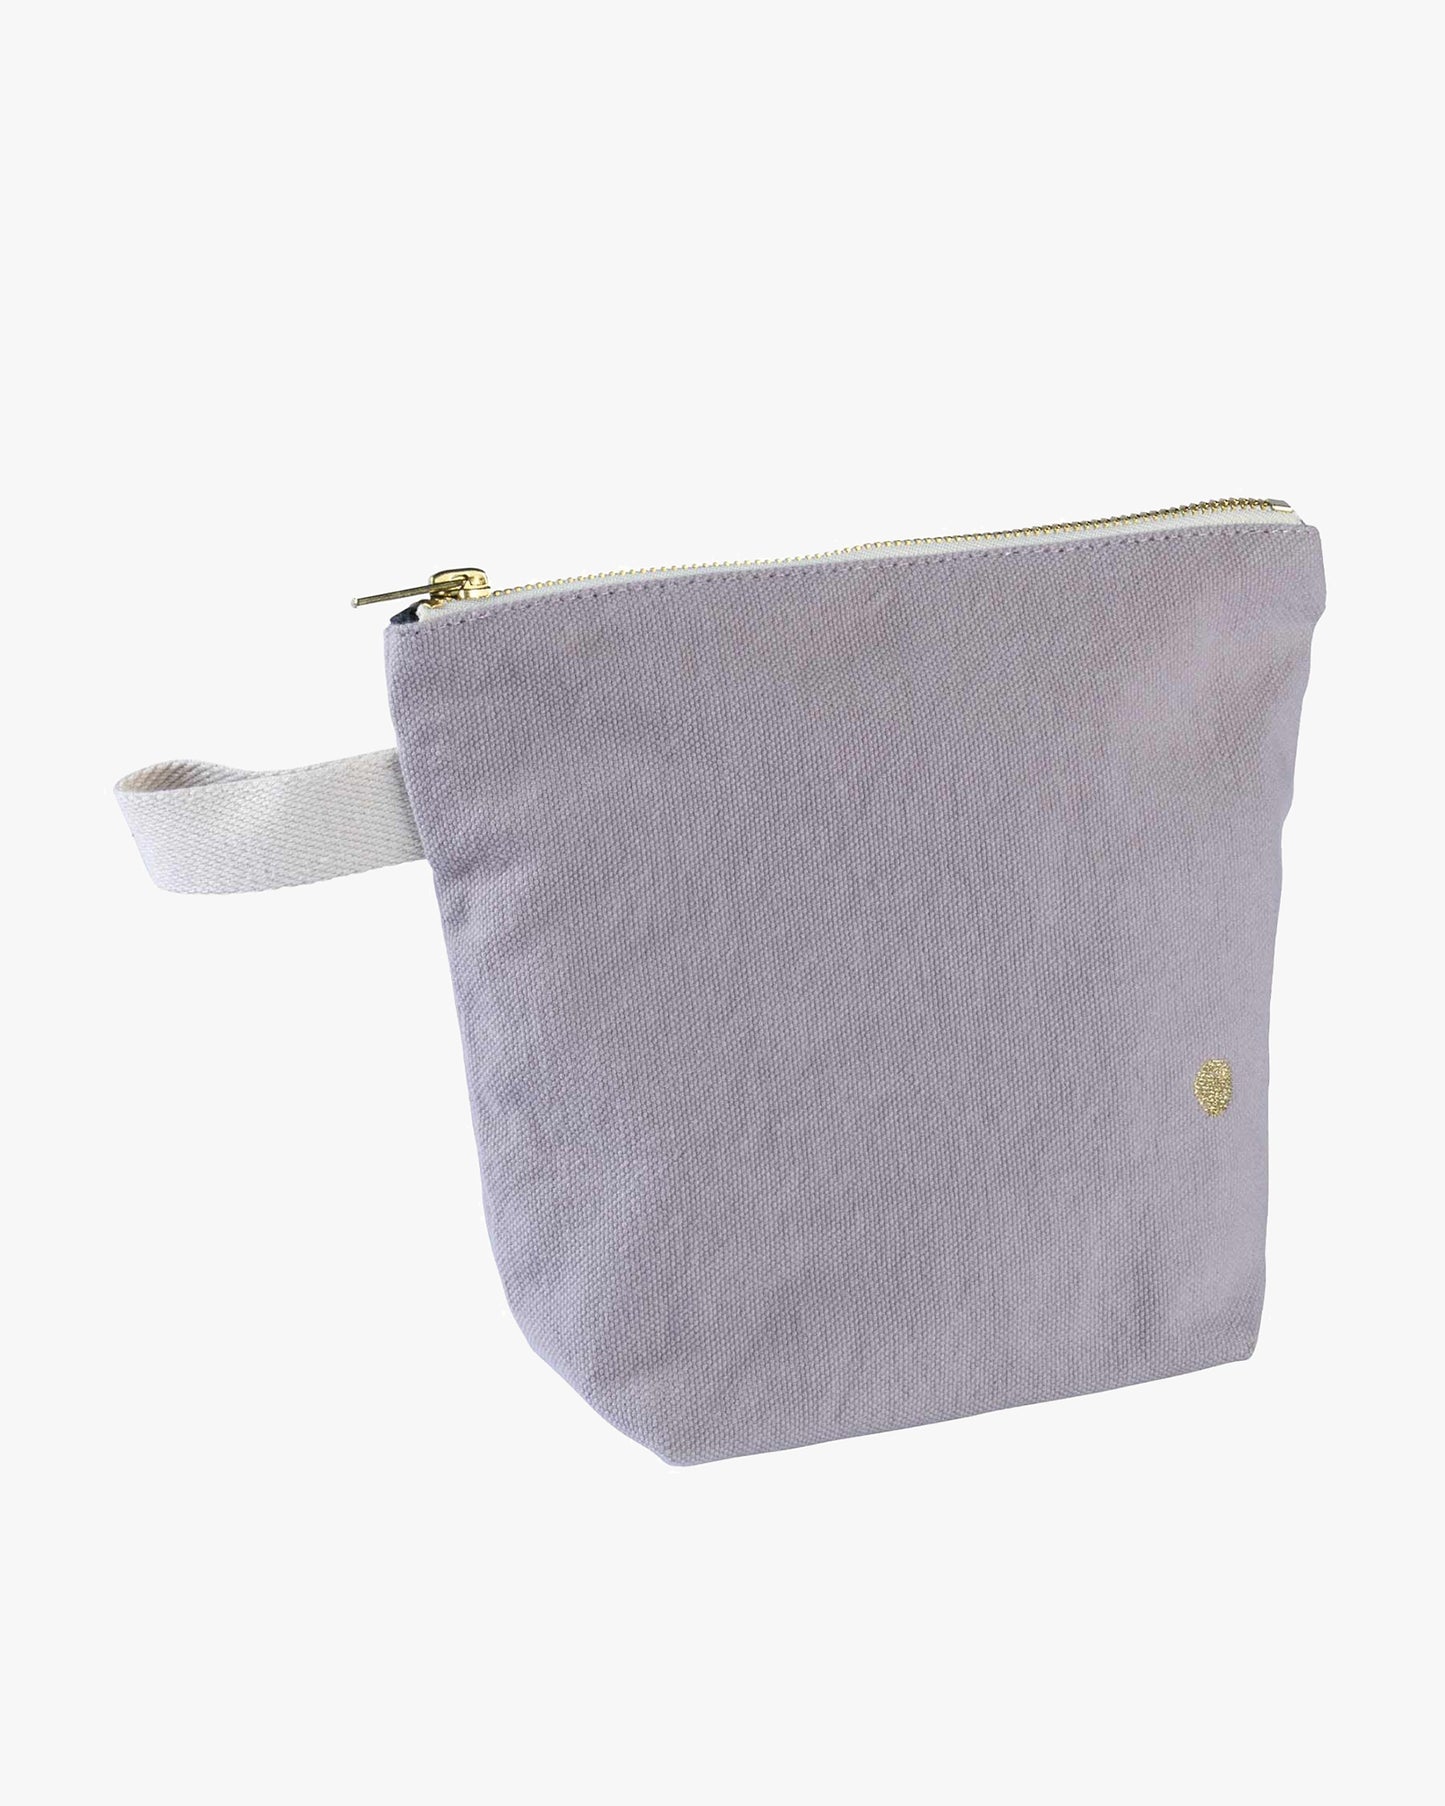 Toiletry bag "Large"